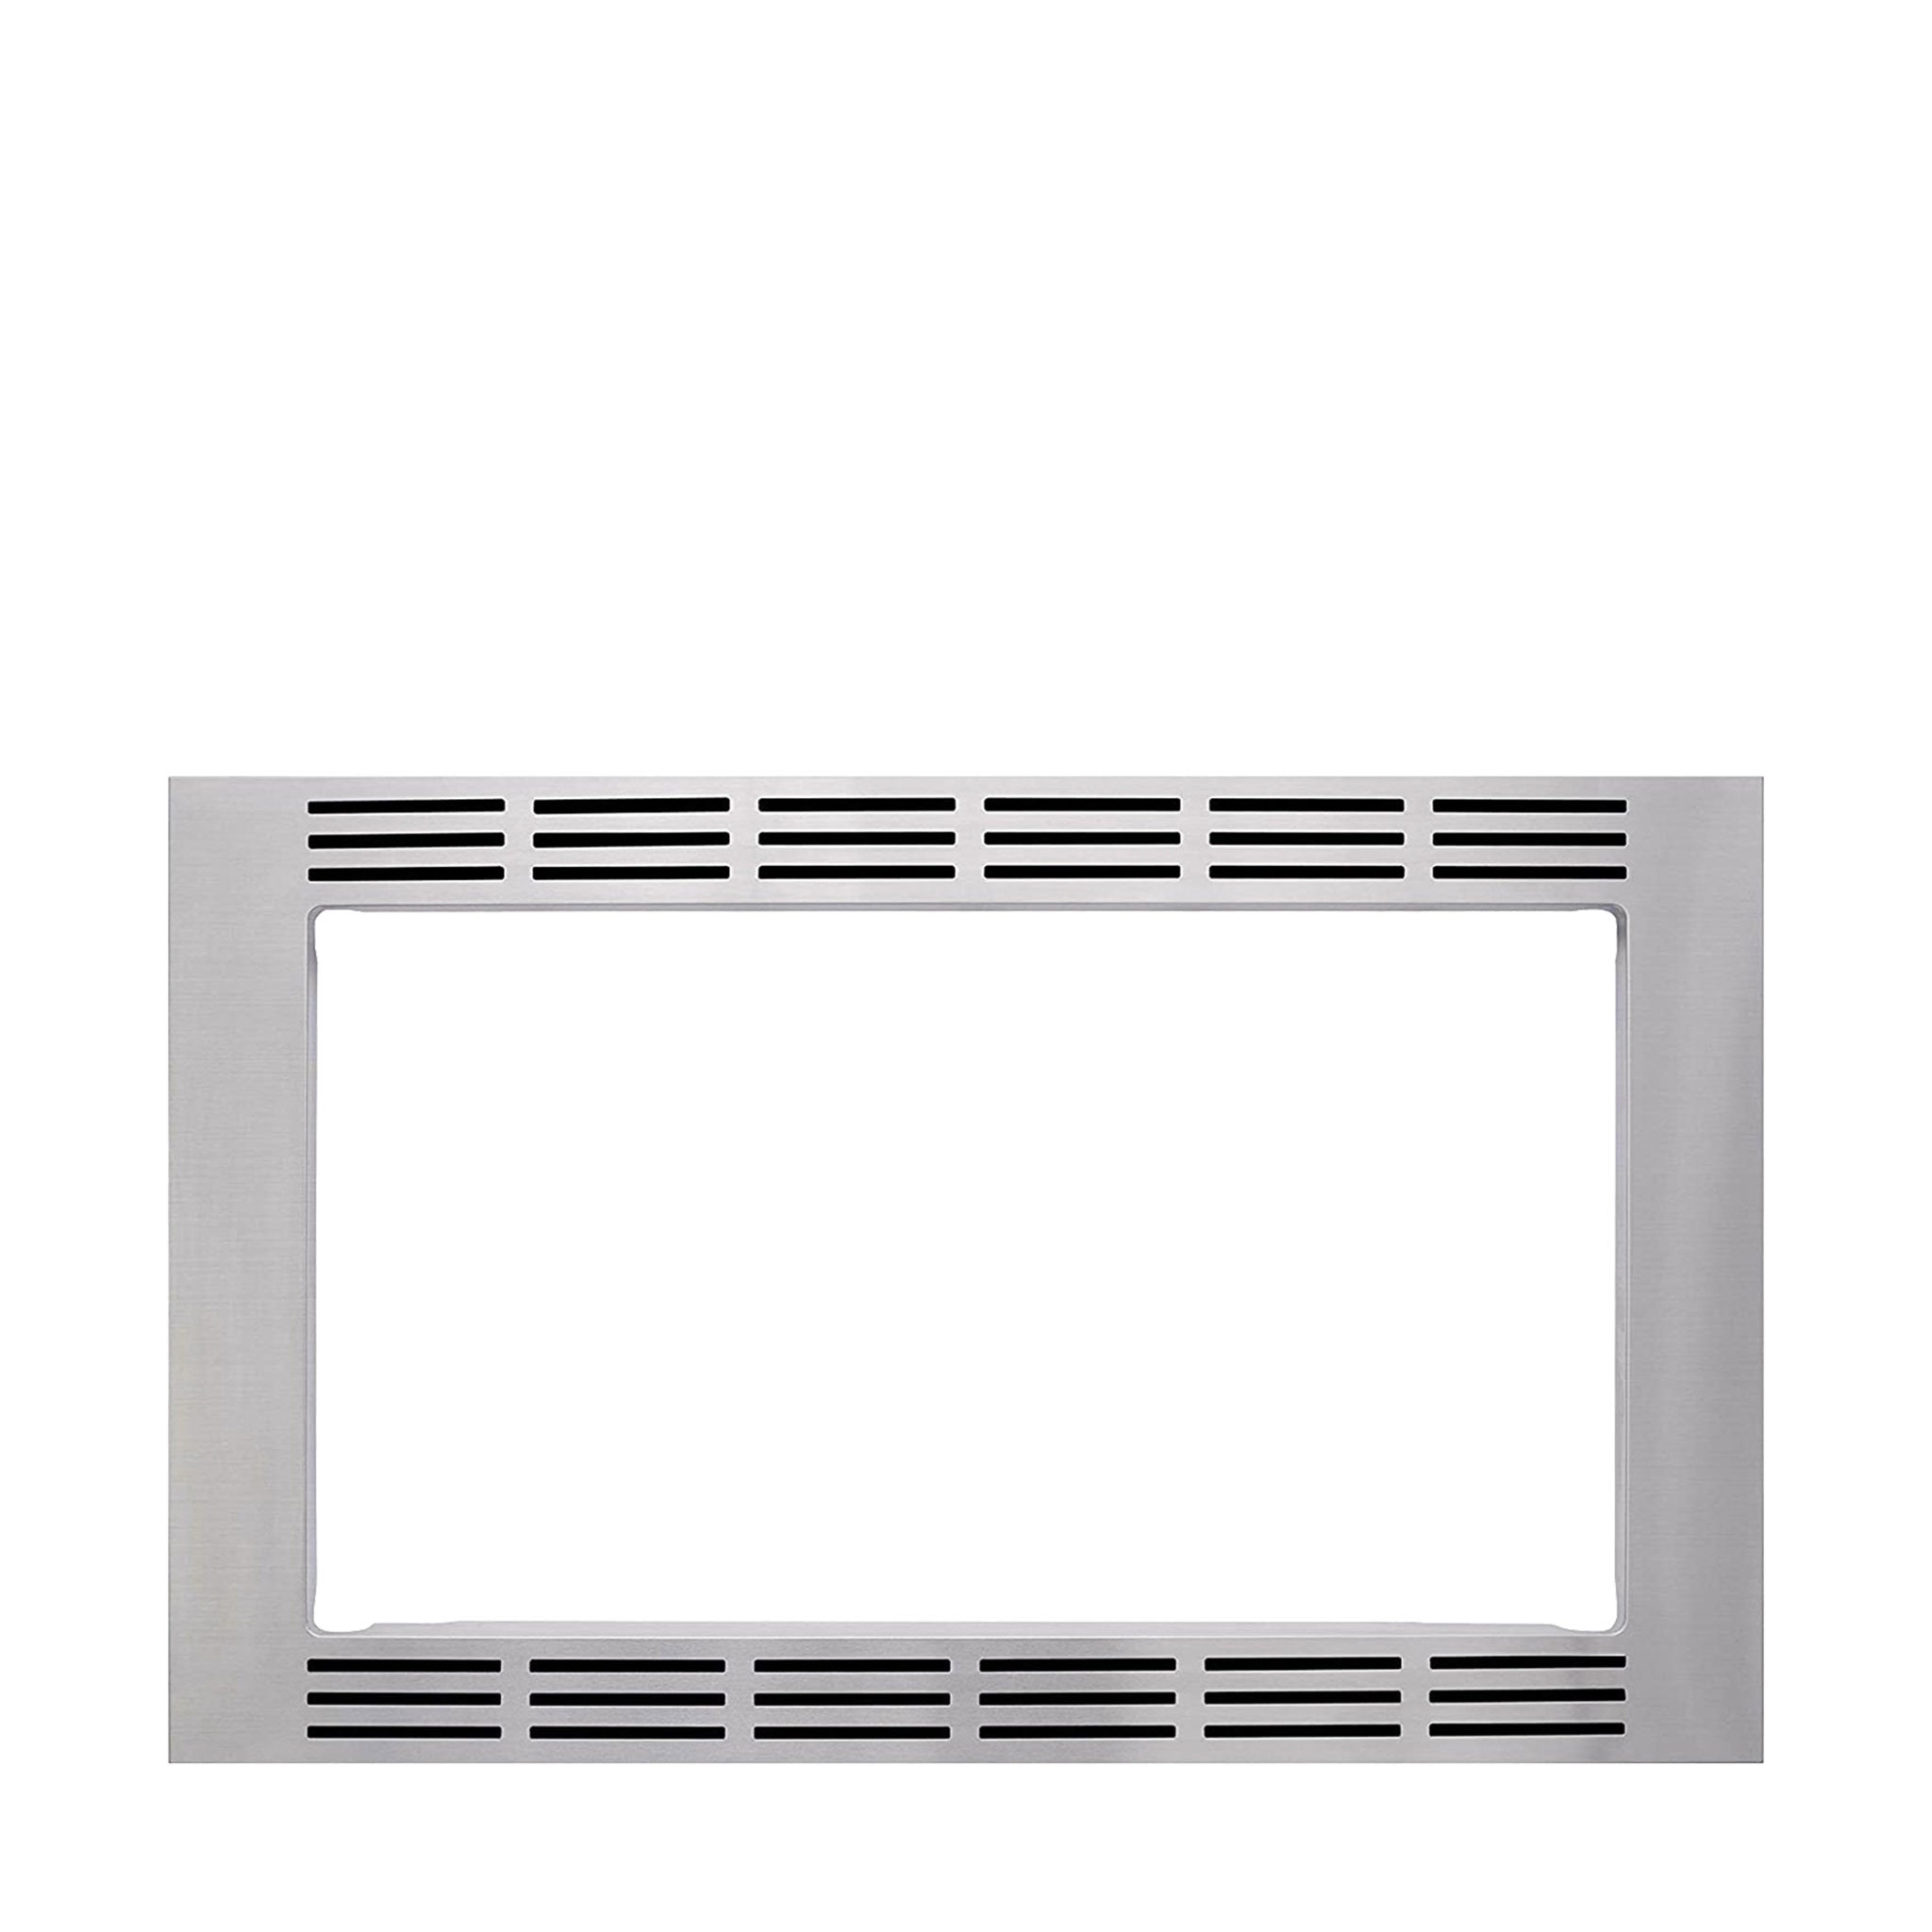 Panasonic 30-inch Built-In Microwave Oven Trim Kit for 2.2 cu. ft ...